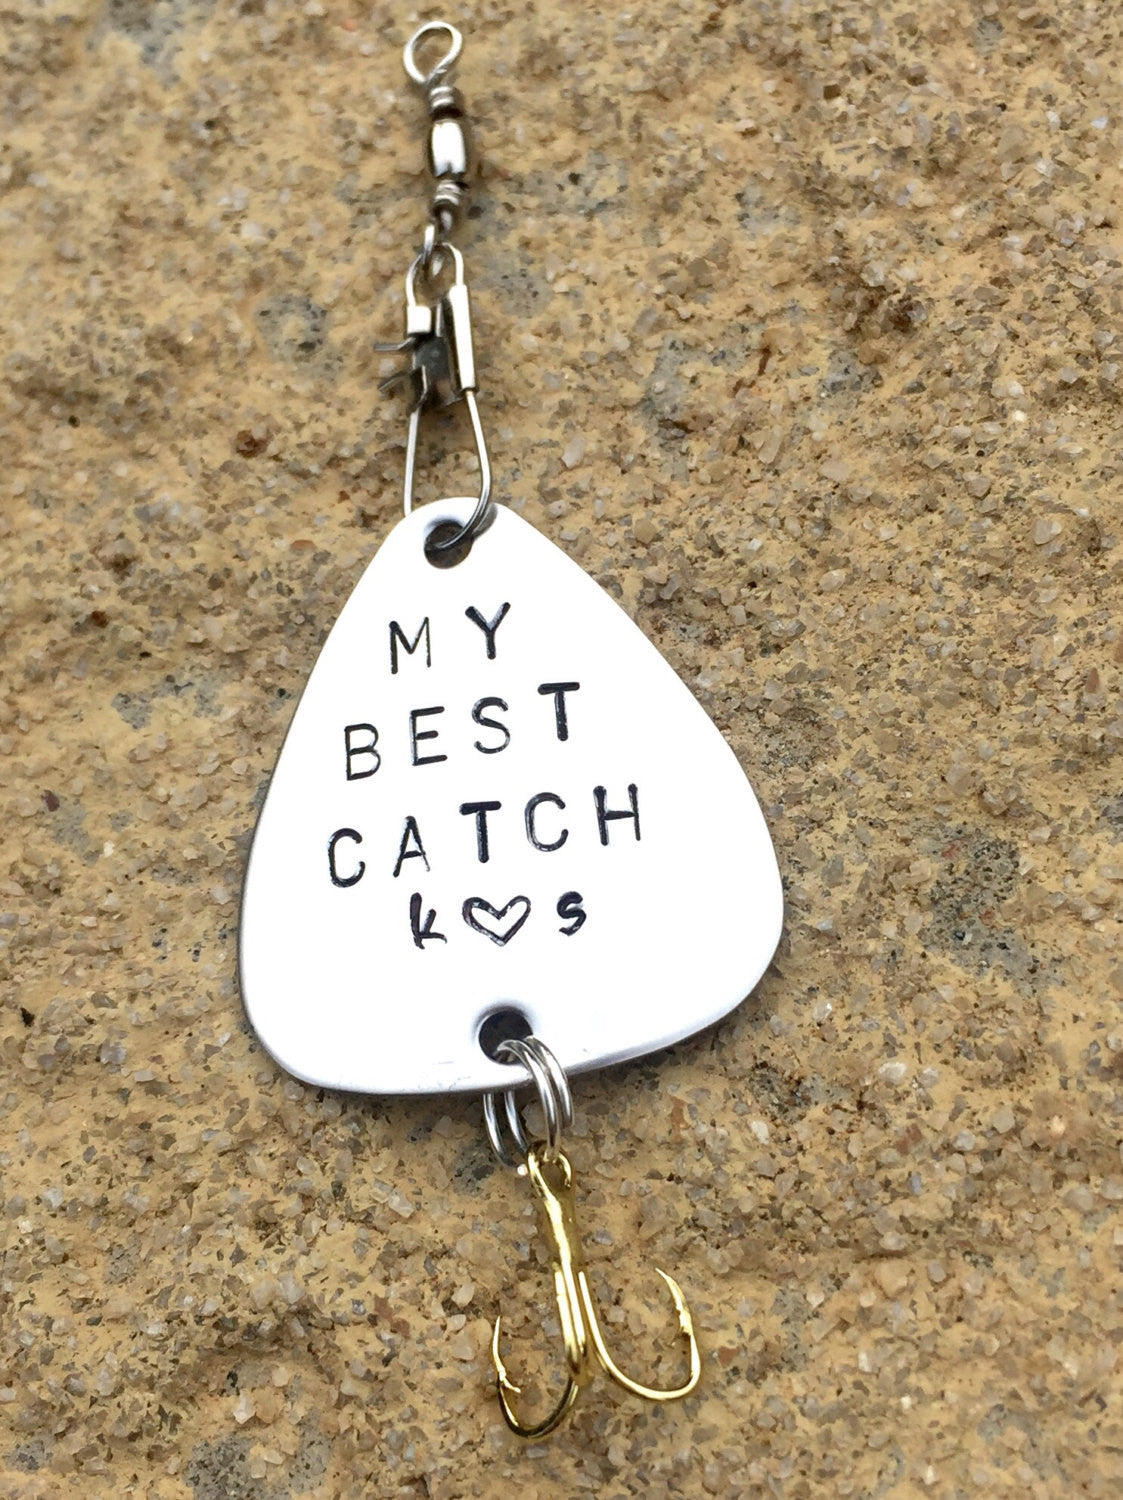 Fishing Lure,Boyfriend Gift, Personalized Fishing Lure, Hand Stamped Fishing Lure,Custom Lures, Father Gift - Natashaaloha, jewelry, bracelets, necklace, keychains, fishing lures, gifts for men, charms, personalized, 